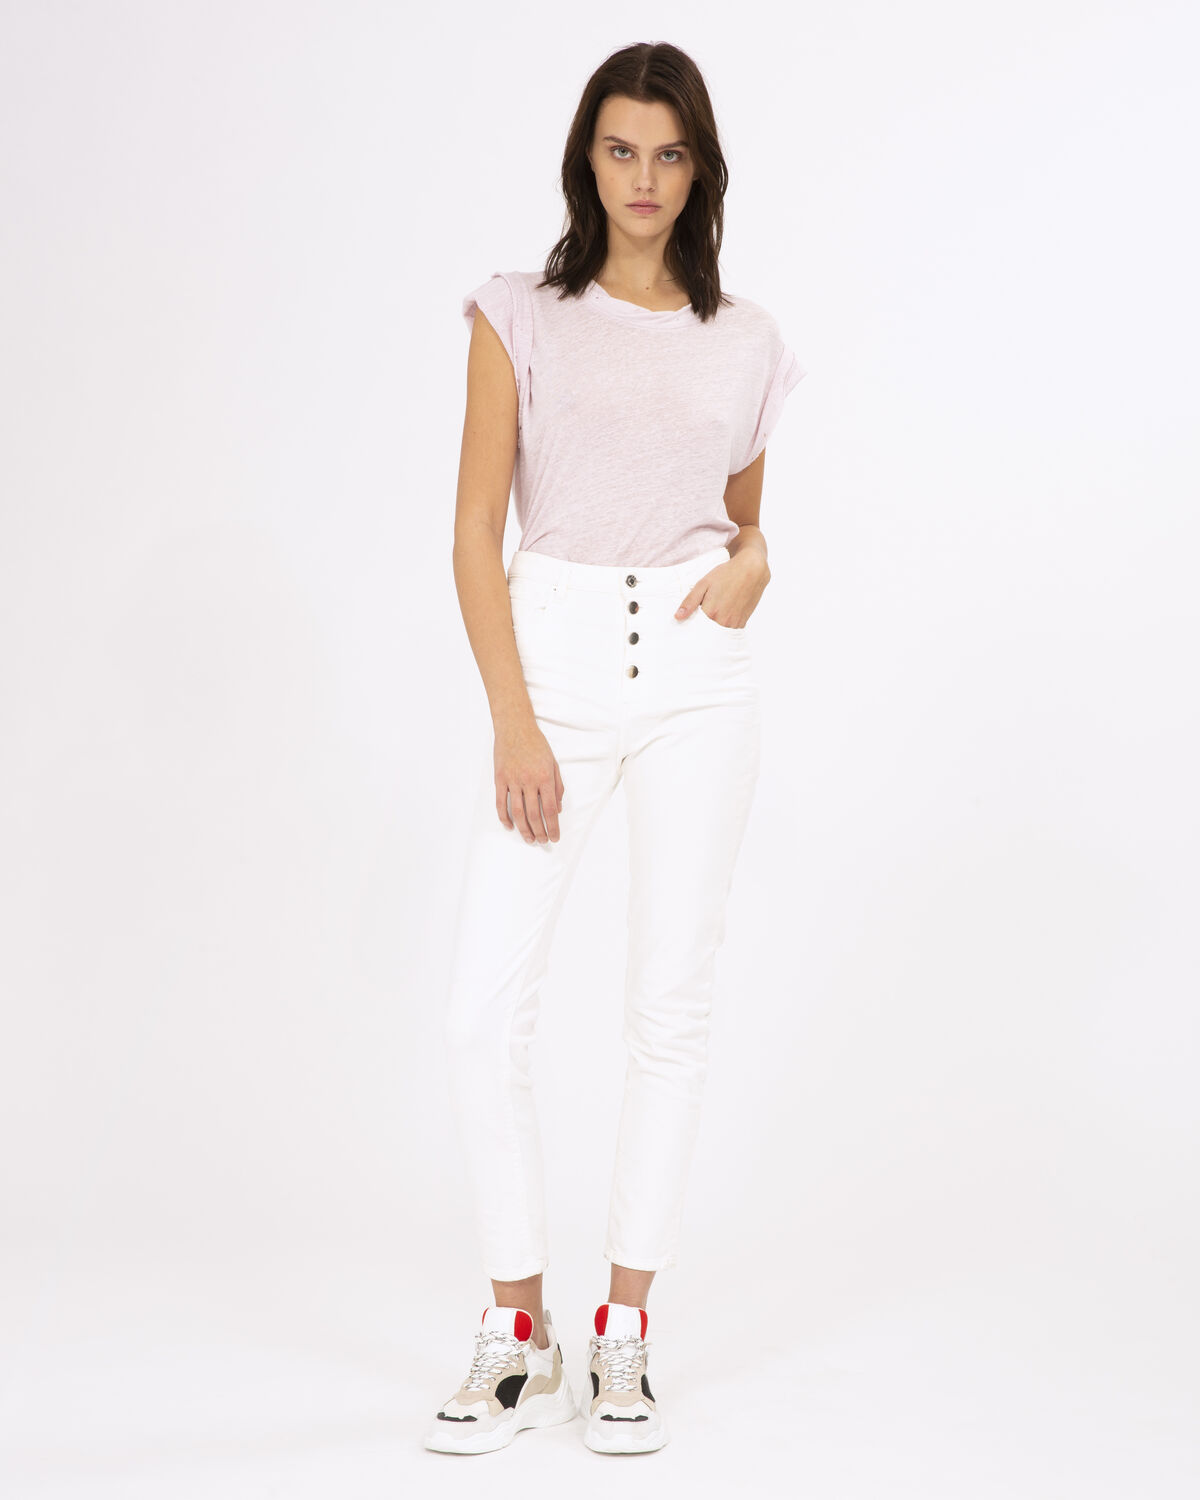 Photo of IRO Paris Gaety Jeans Off White - These High Waist Jeans Feature A Row Of Buttons And Distressed Details On The Bottom. Combine Them With High Sandals For A Sophisticated Look, Or Sneakers For A Casual Look. Spring Summer 19